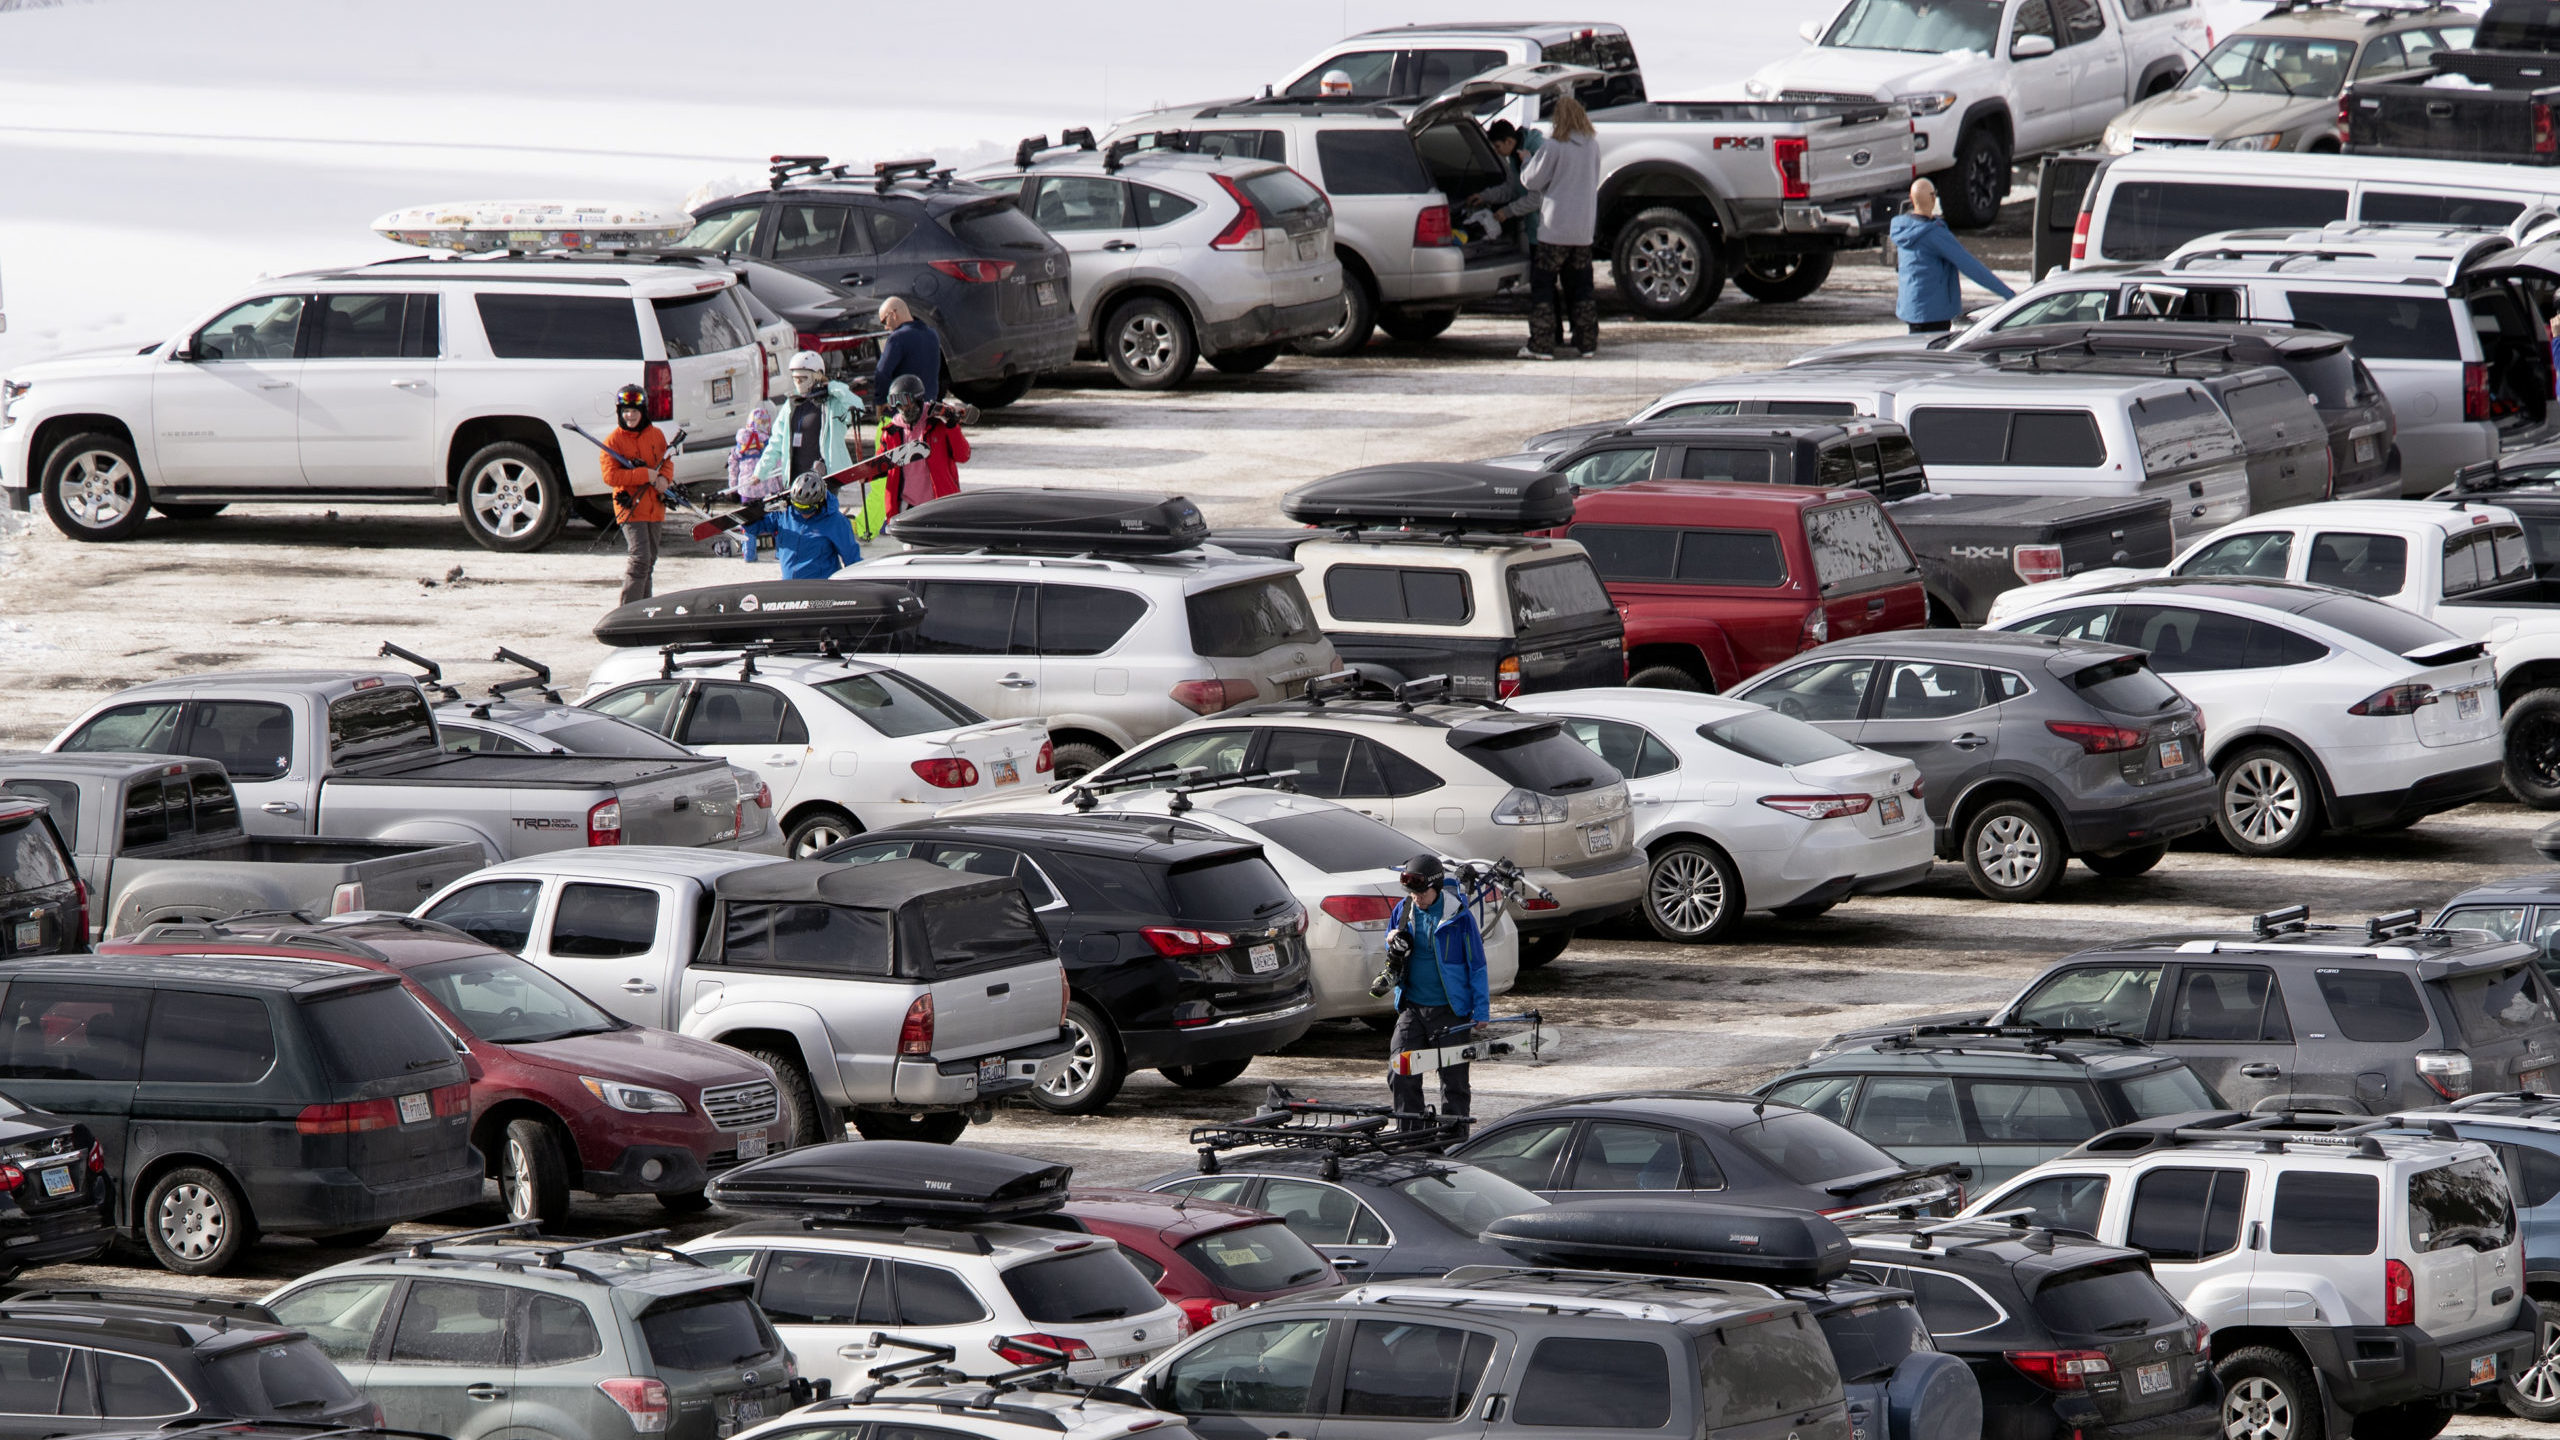 Cars load up one of the parking lots at Alta Ski Area on Saturday, Jan. 5, 2019.
(Scott G Winterton...